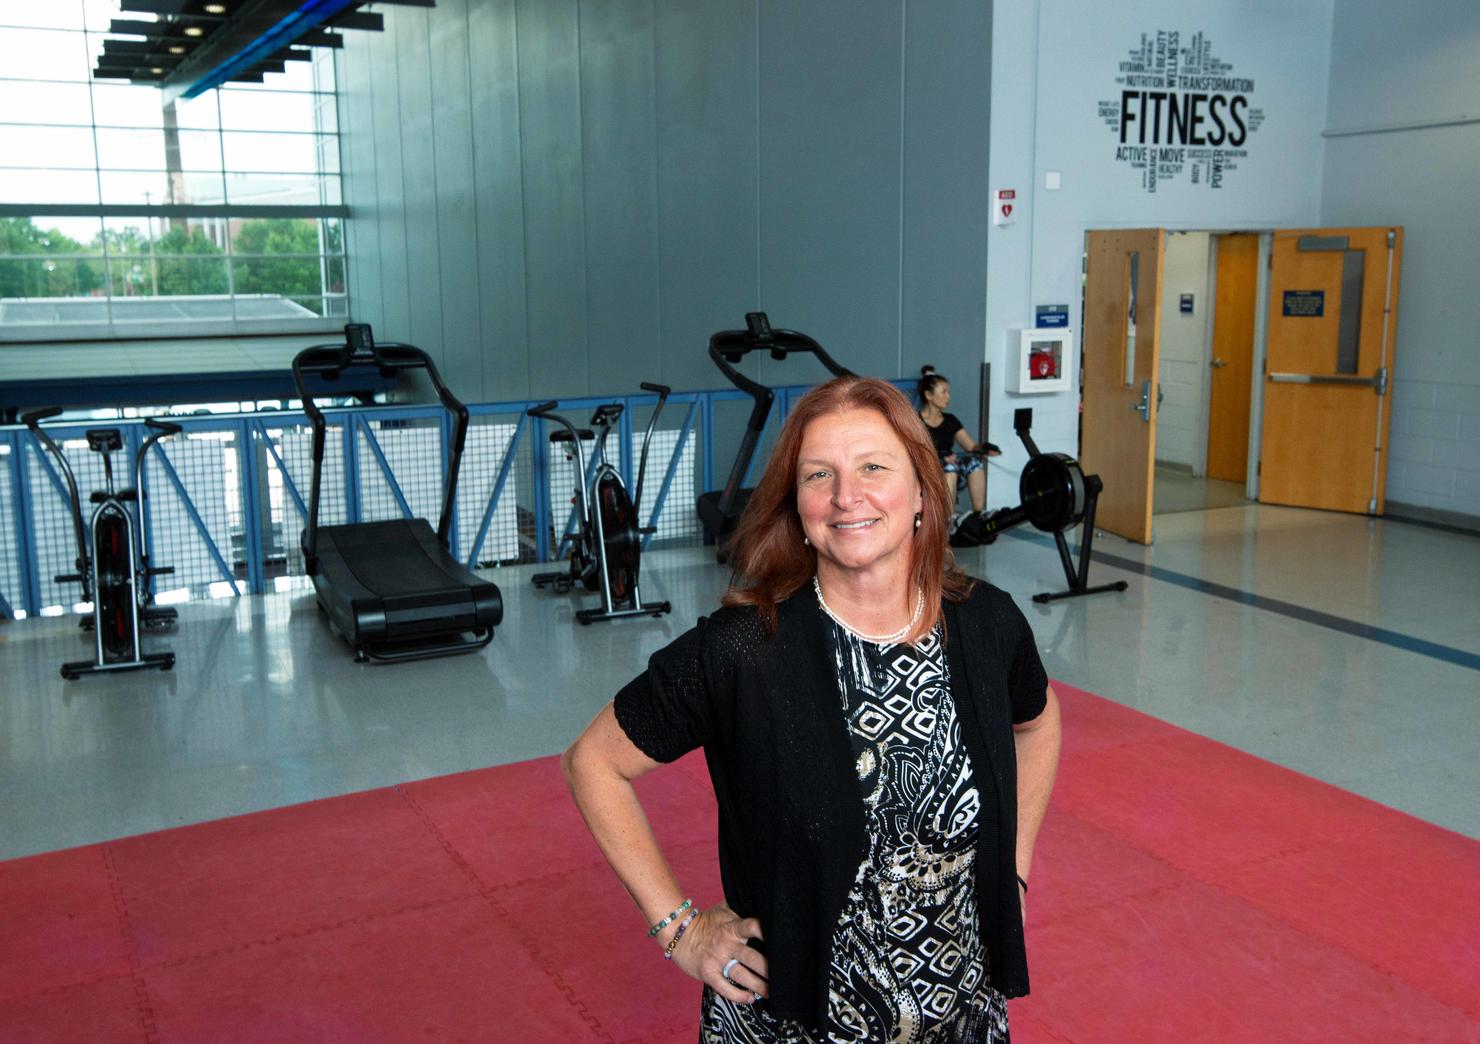 Olga O'Brien stands in front of exercise machines at the Freedom Aquatic & Fitness Center